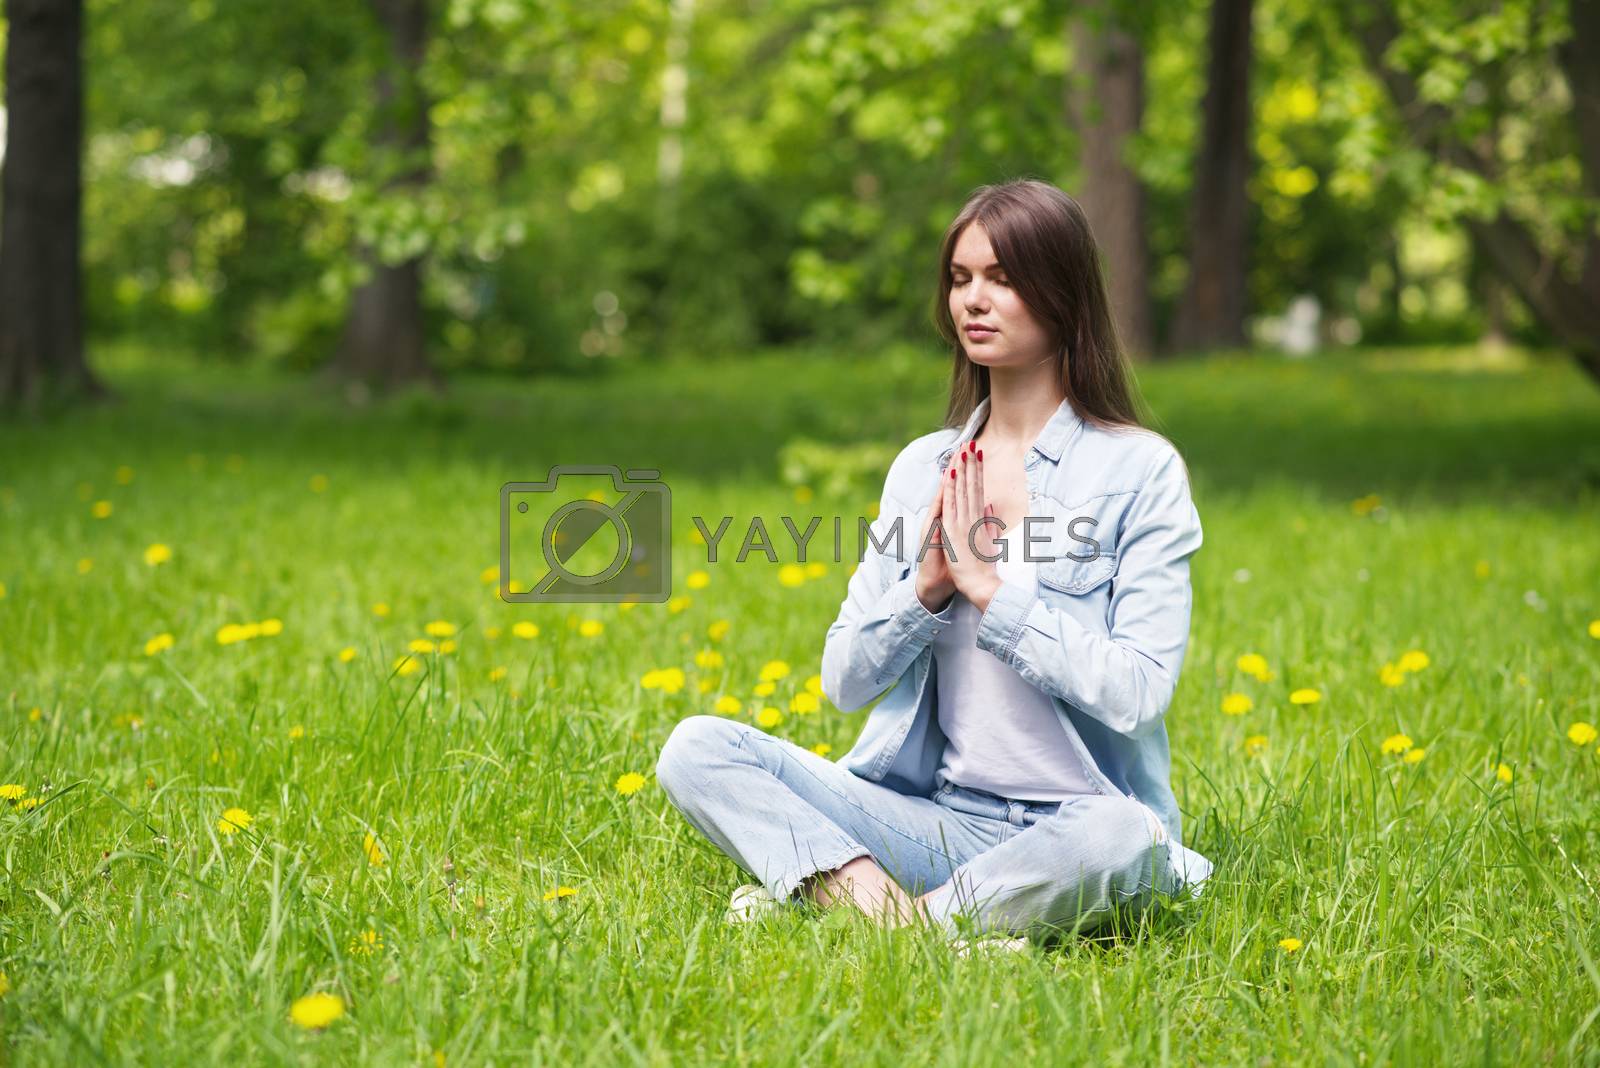 Royalty free image of Young girl meditating in park by ALotOfPeople